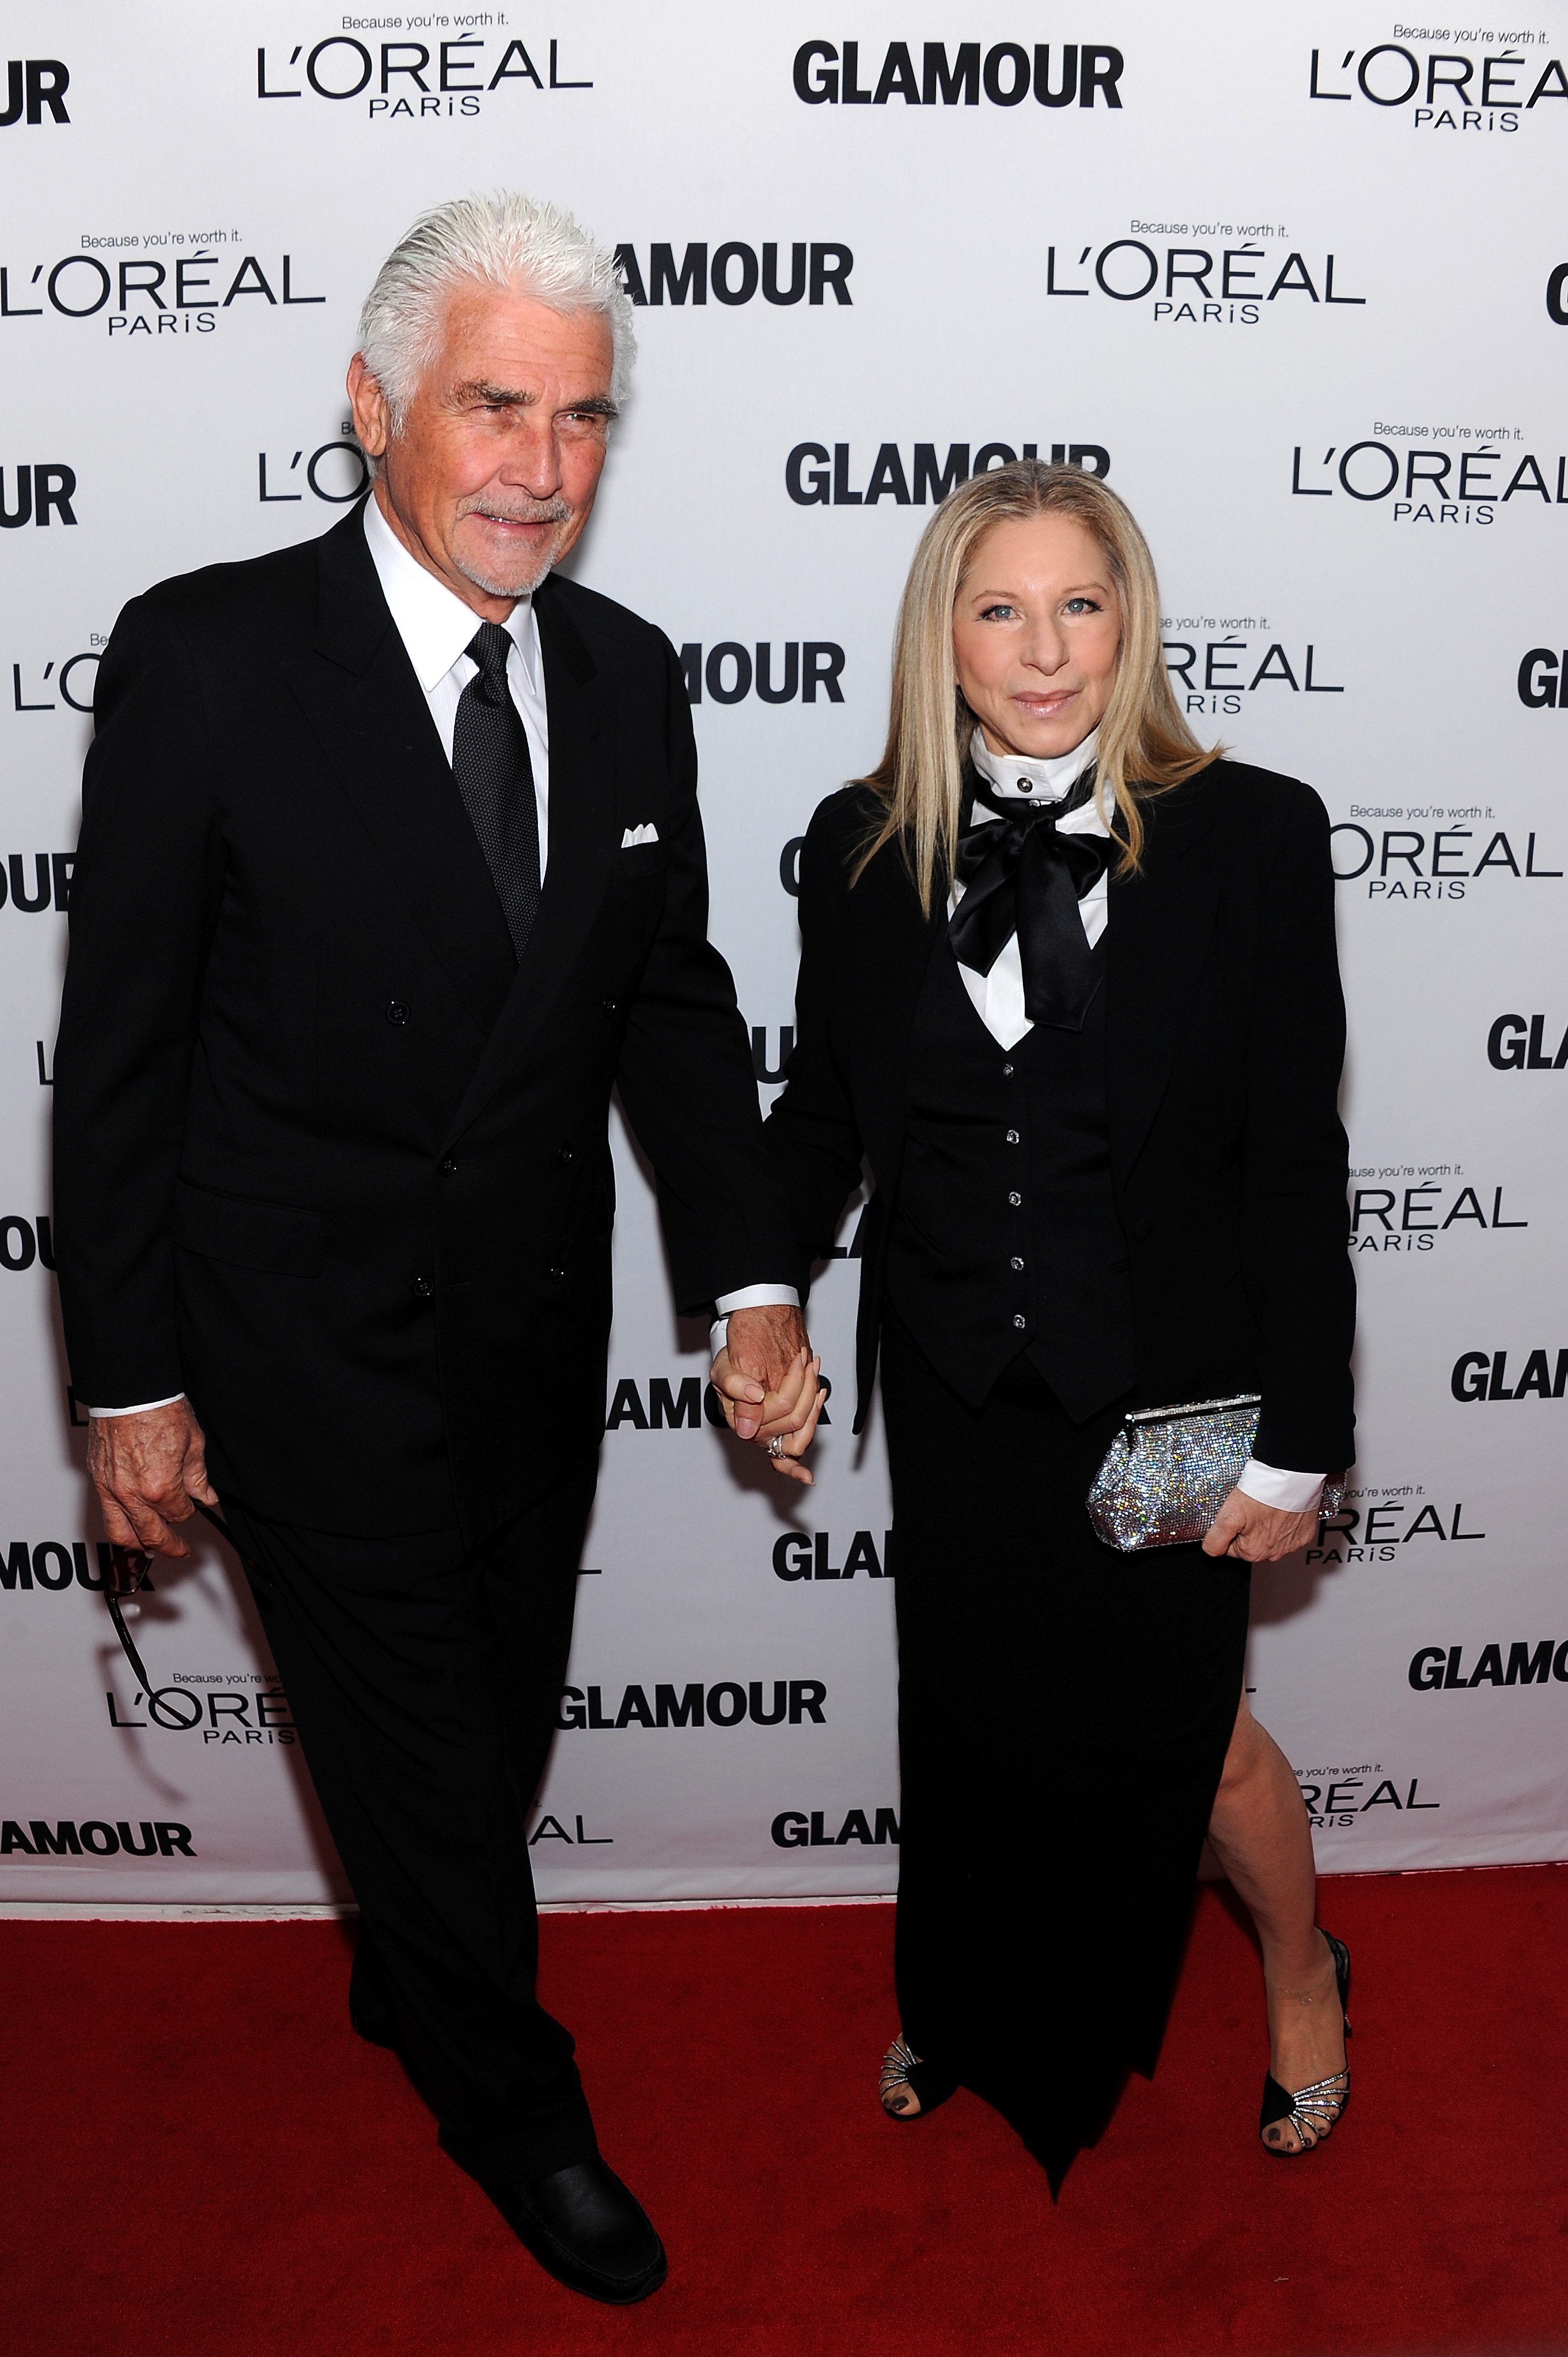 James Brolin and Barbra Streisand at the 23rd Annual Women Of The Year event in New York City on November 11, 2013 | Source: Getty Images